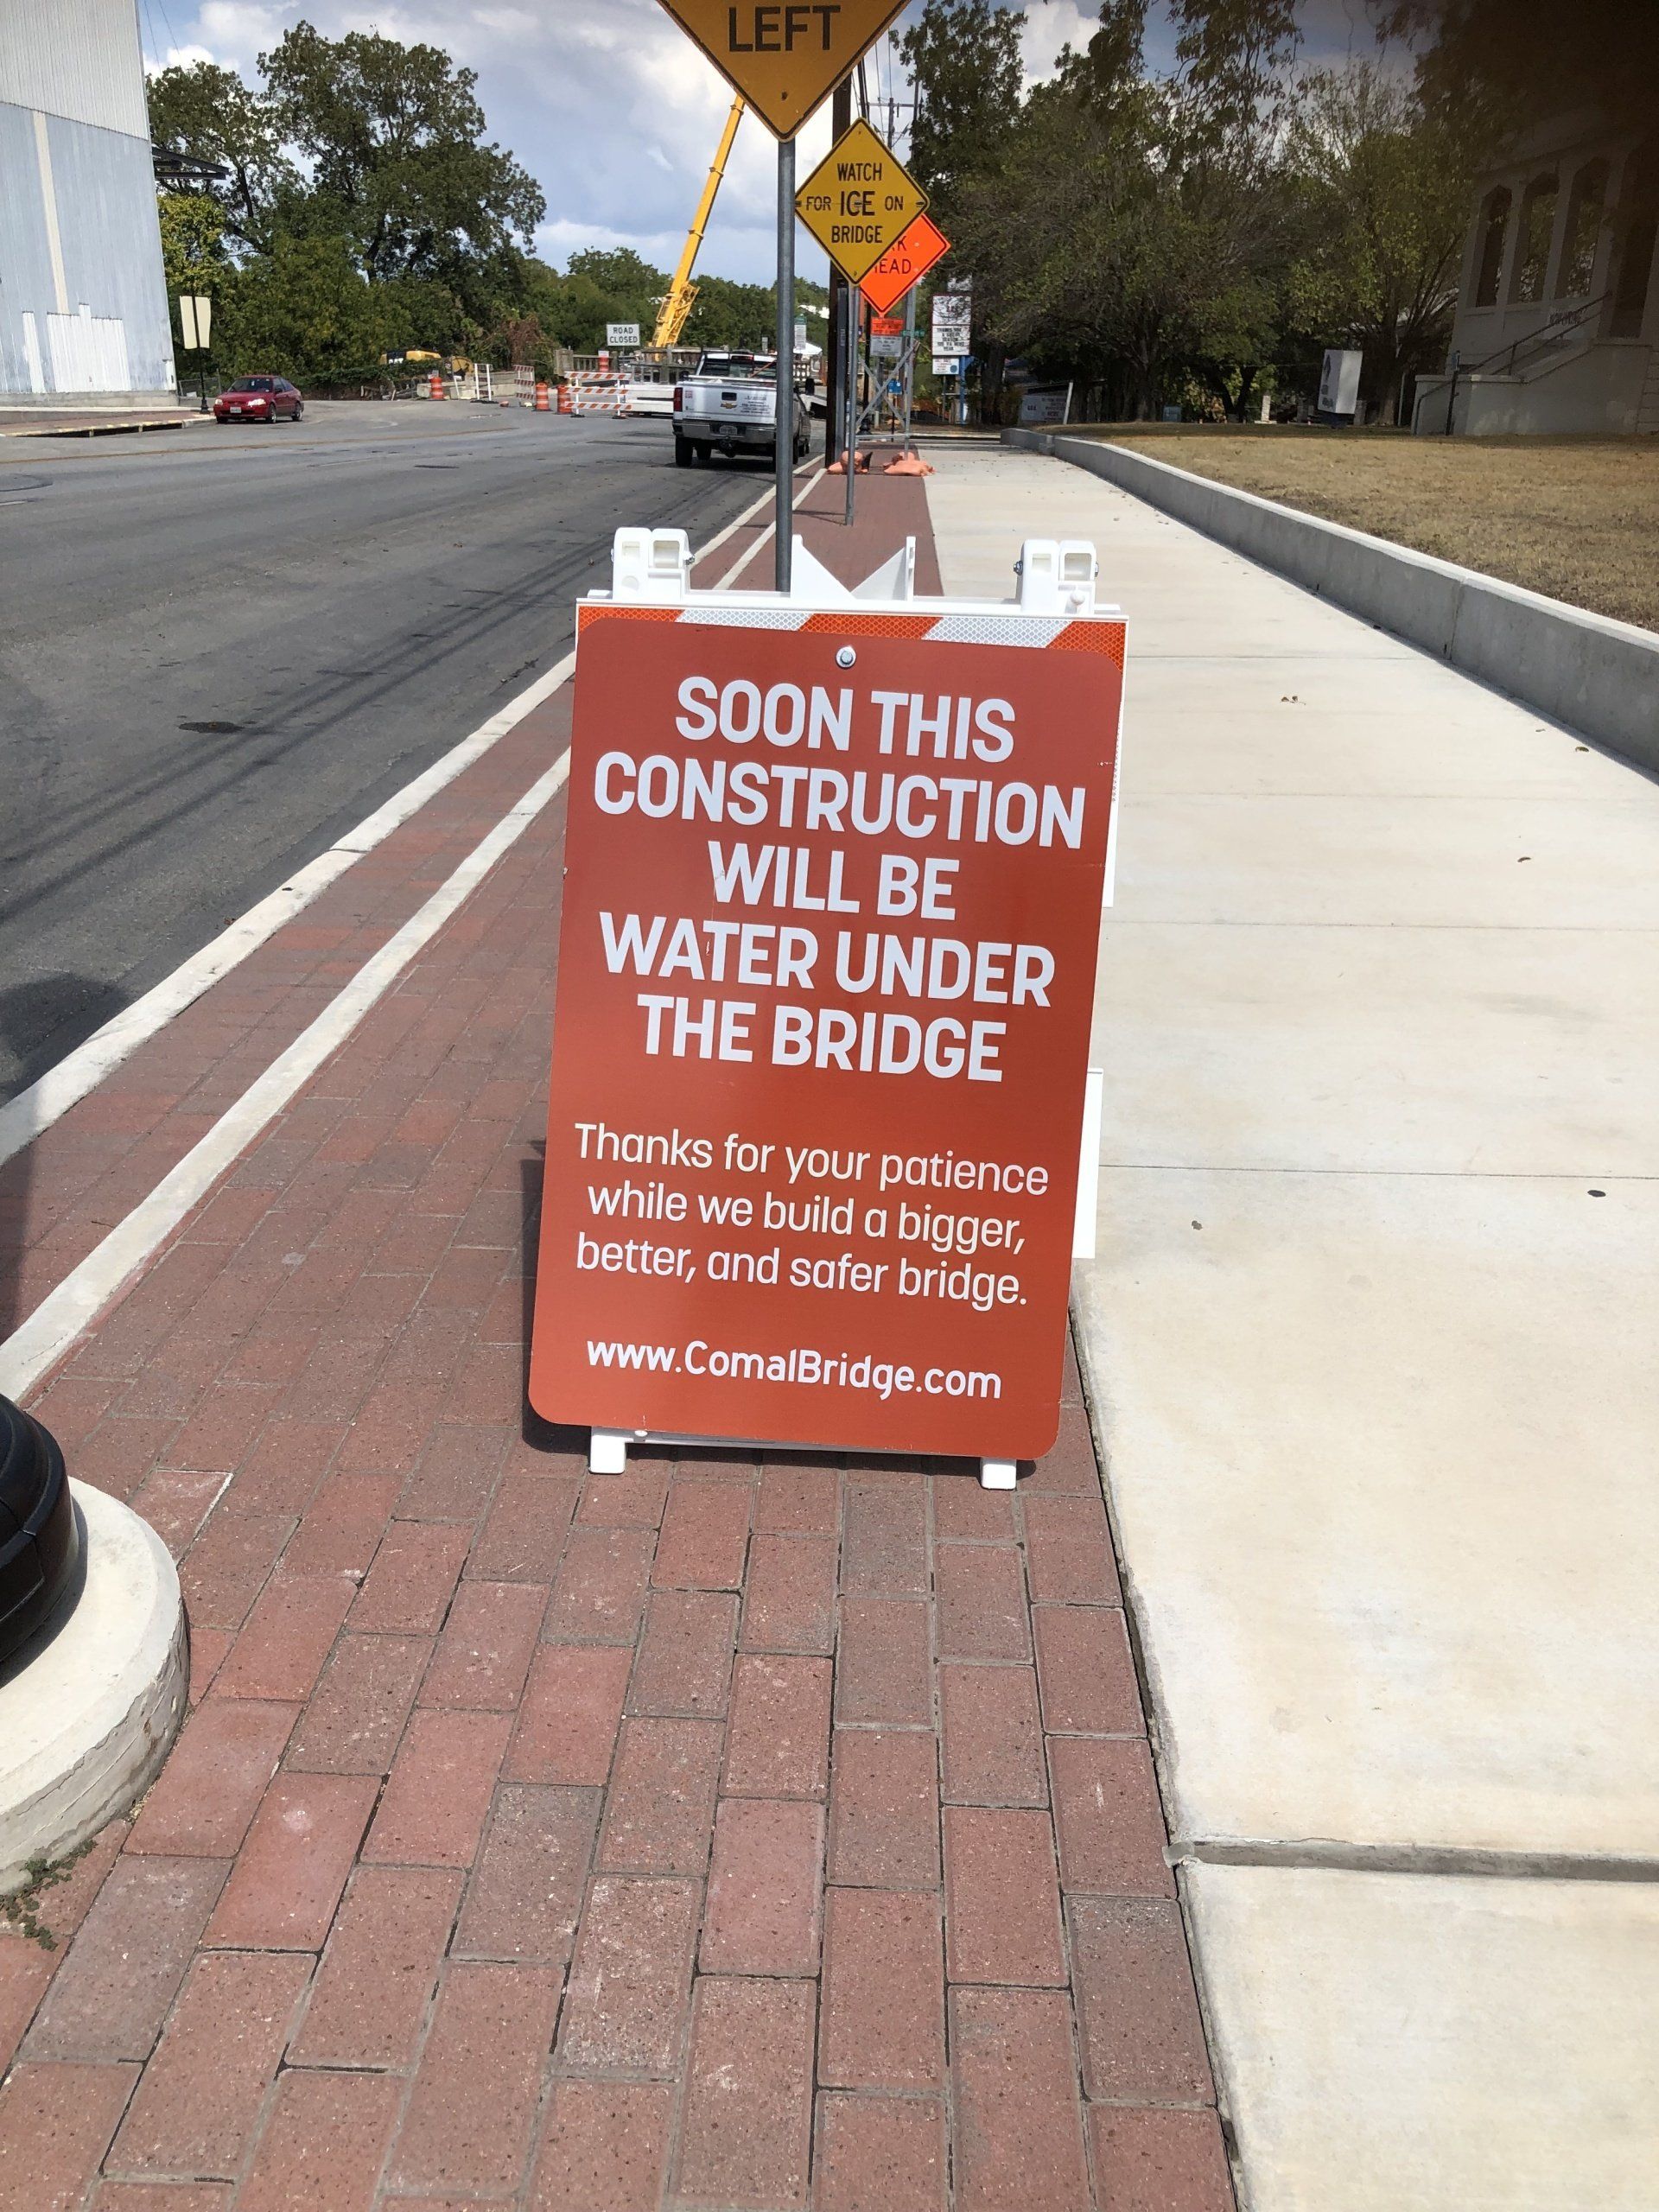 Humourous Sign posted by the City of New Braunfels regarding the Bridge Construction: SOON THIS CONSTRUCTION WILL BE WATER UNDER THE BRIDGE 10-1-19 - Texas Tubes